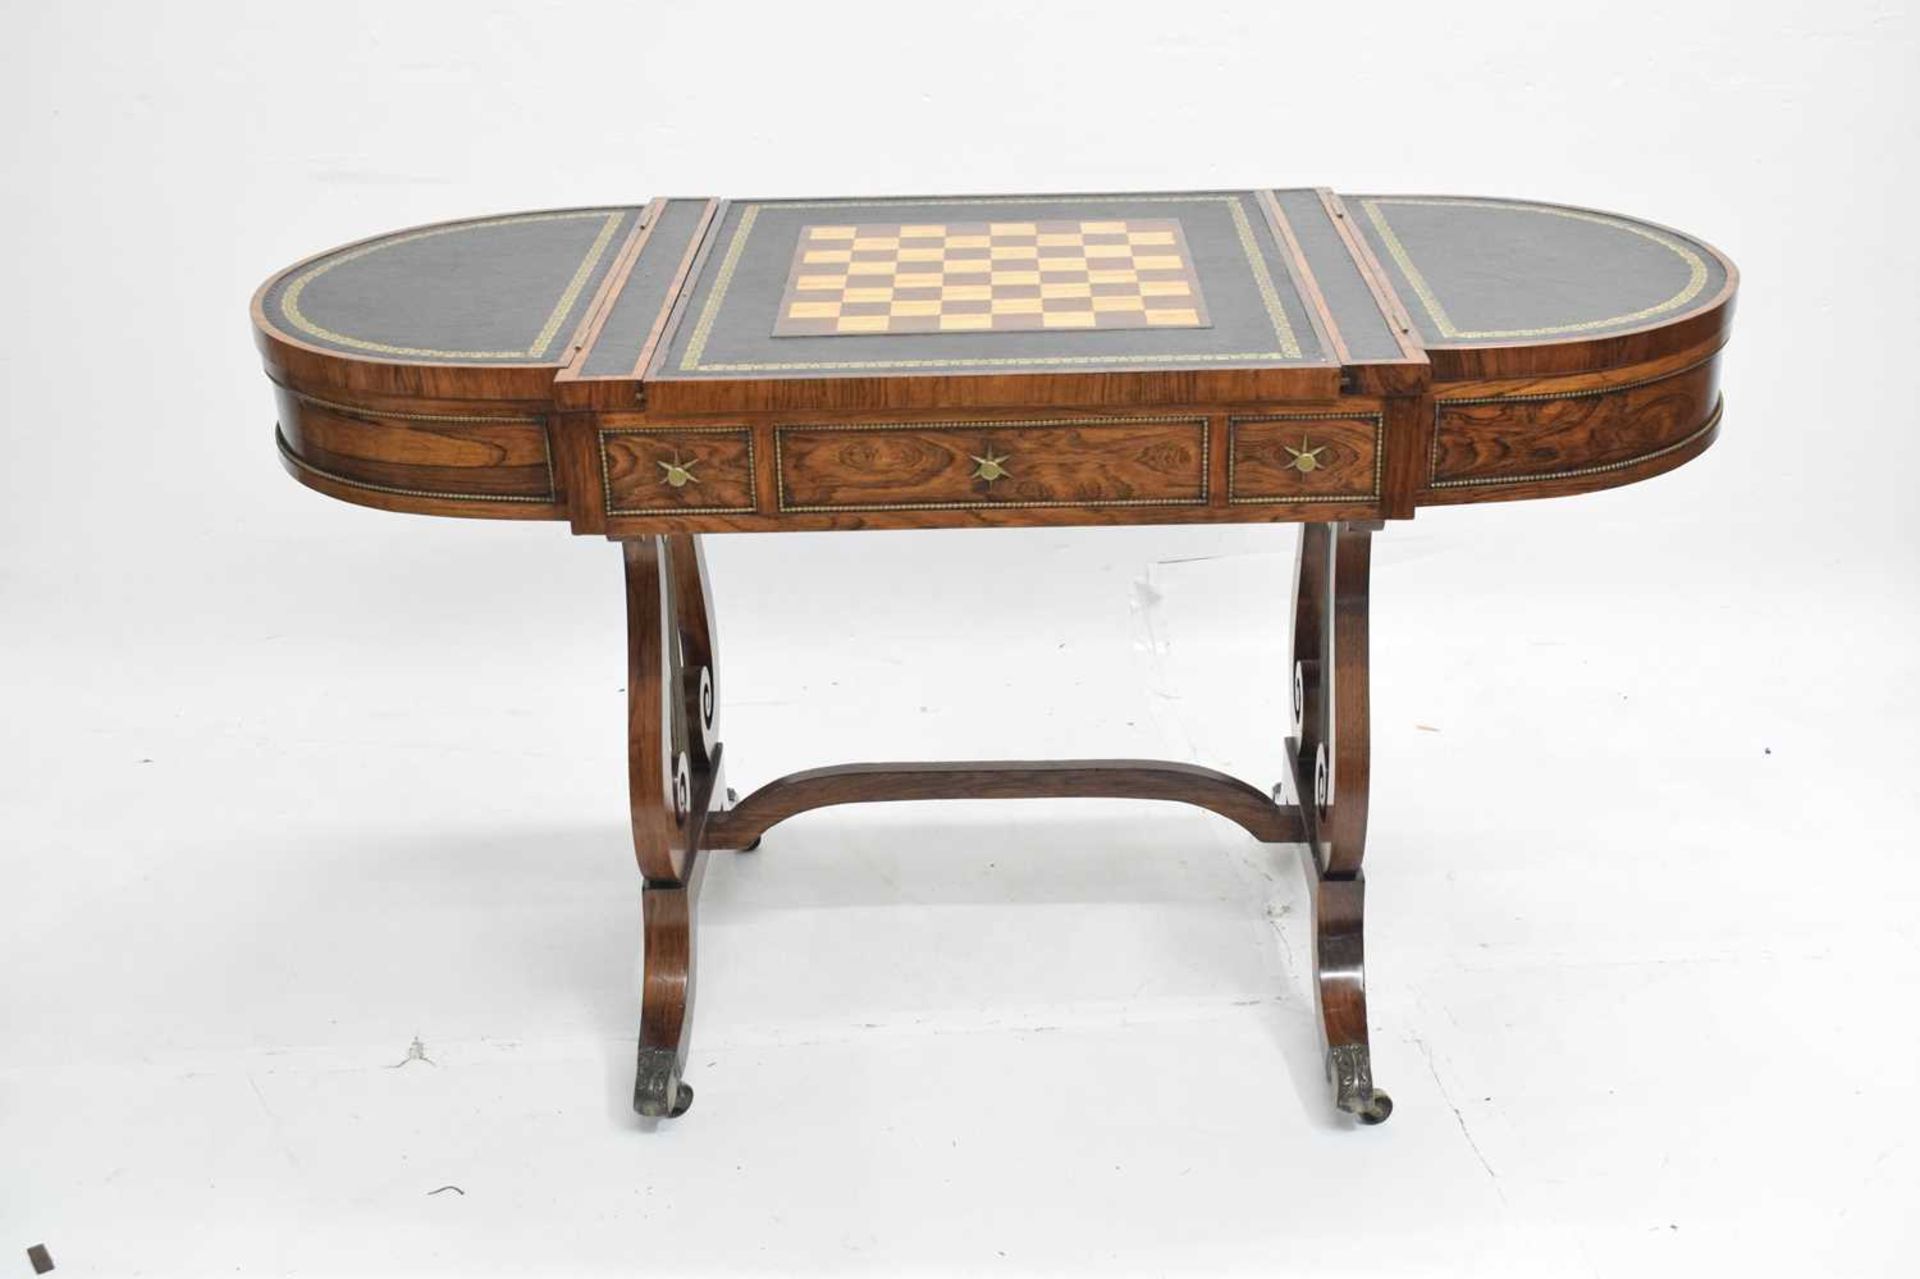 Fine Regency rosewood sofa backgammon table, in the manner of Gillows of Lancaster - Image 3 of 10